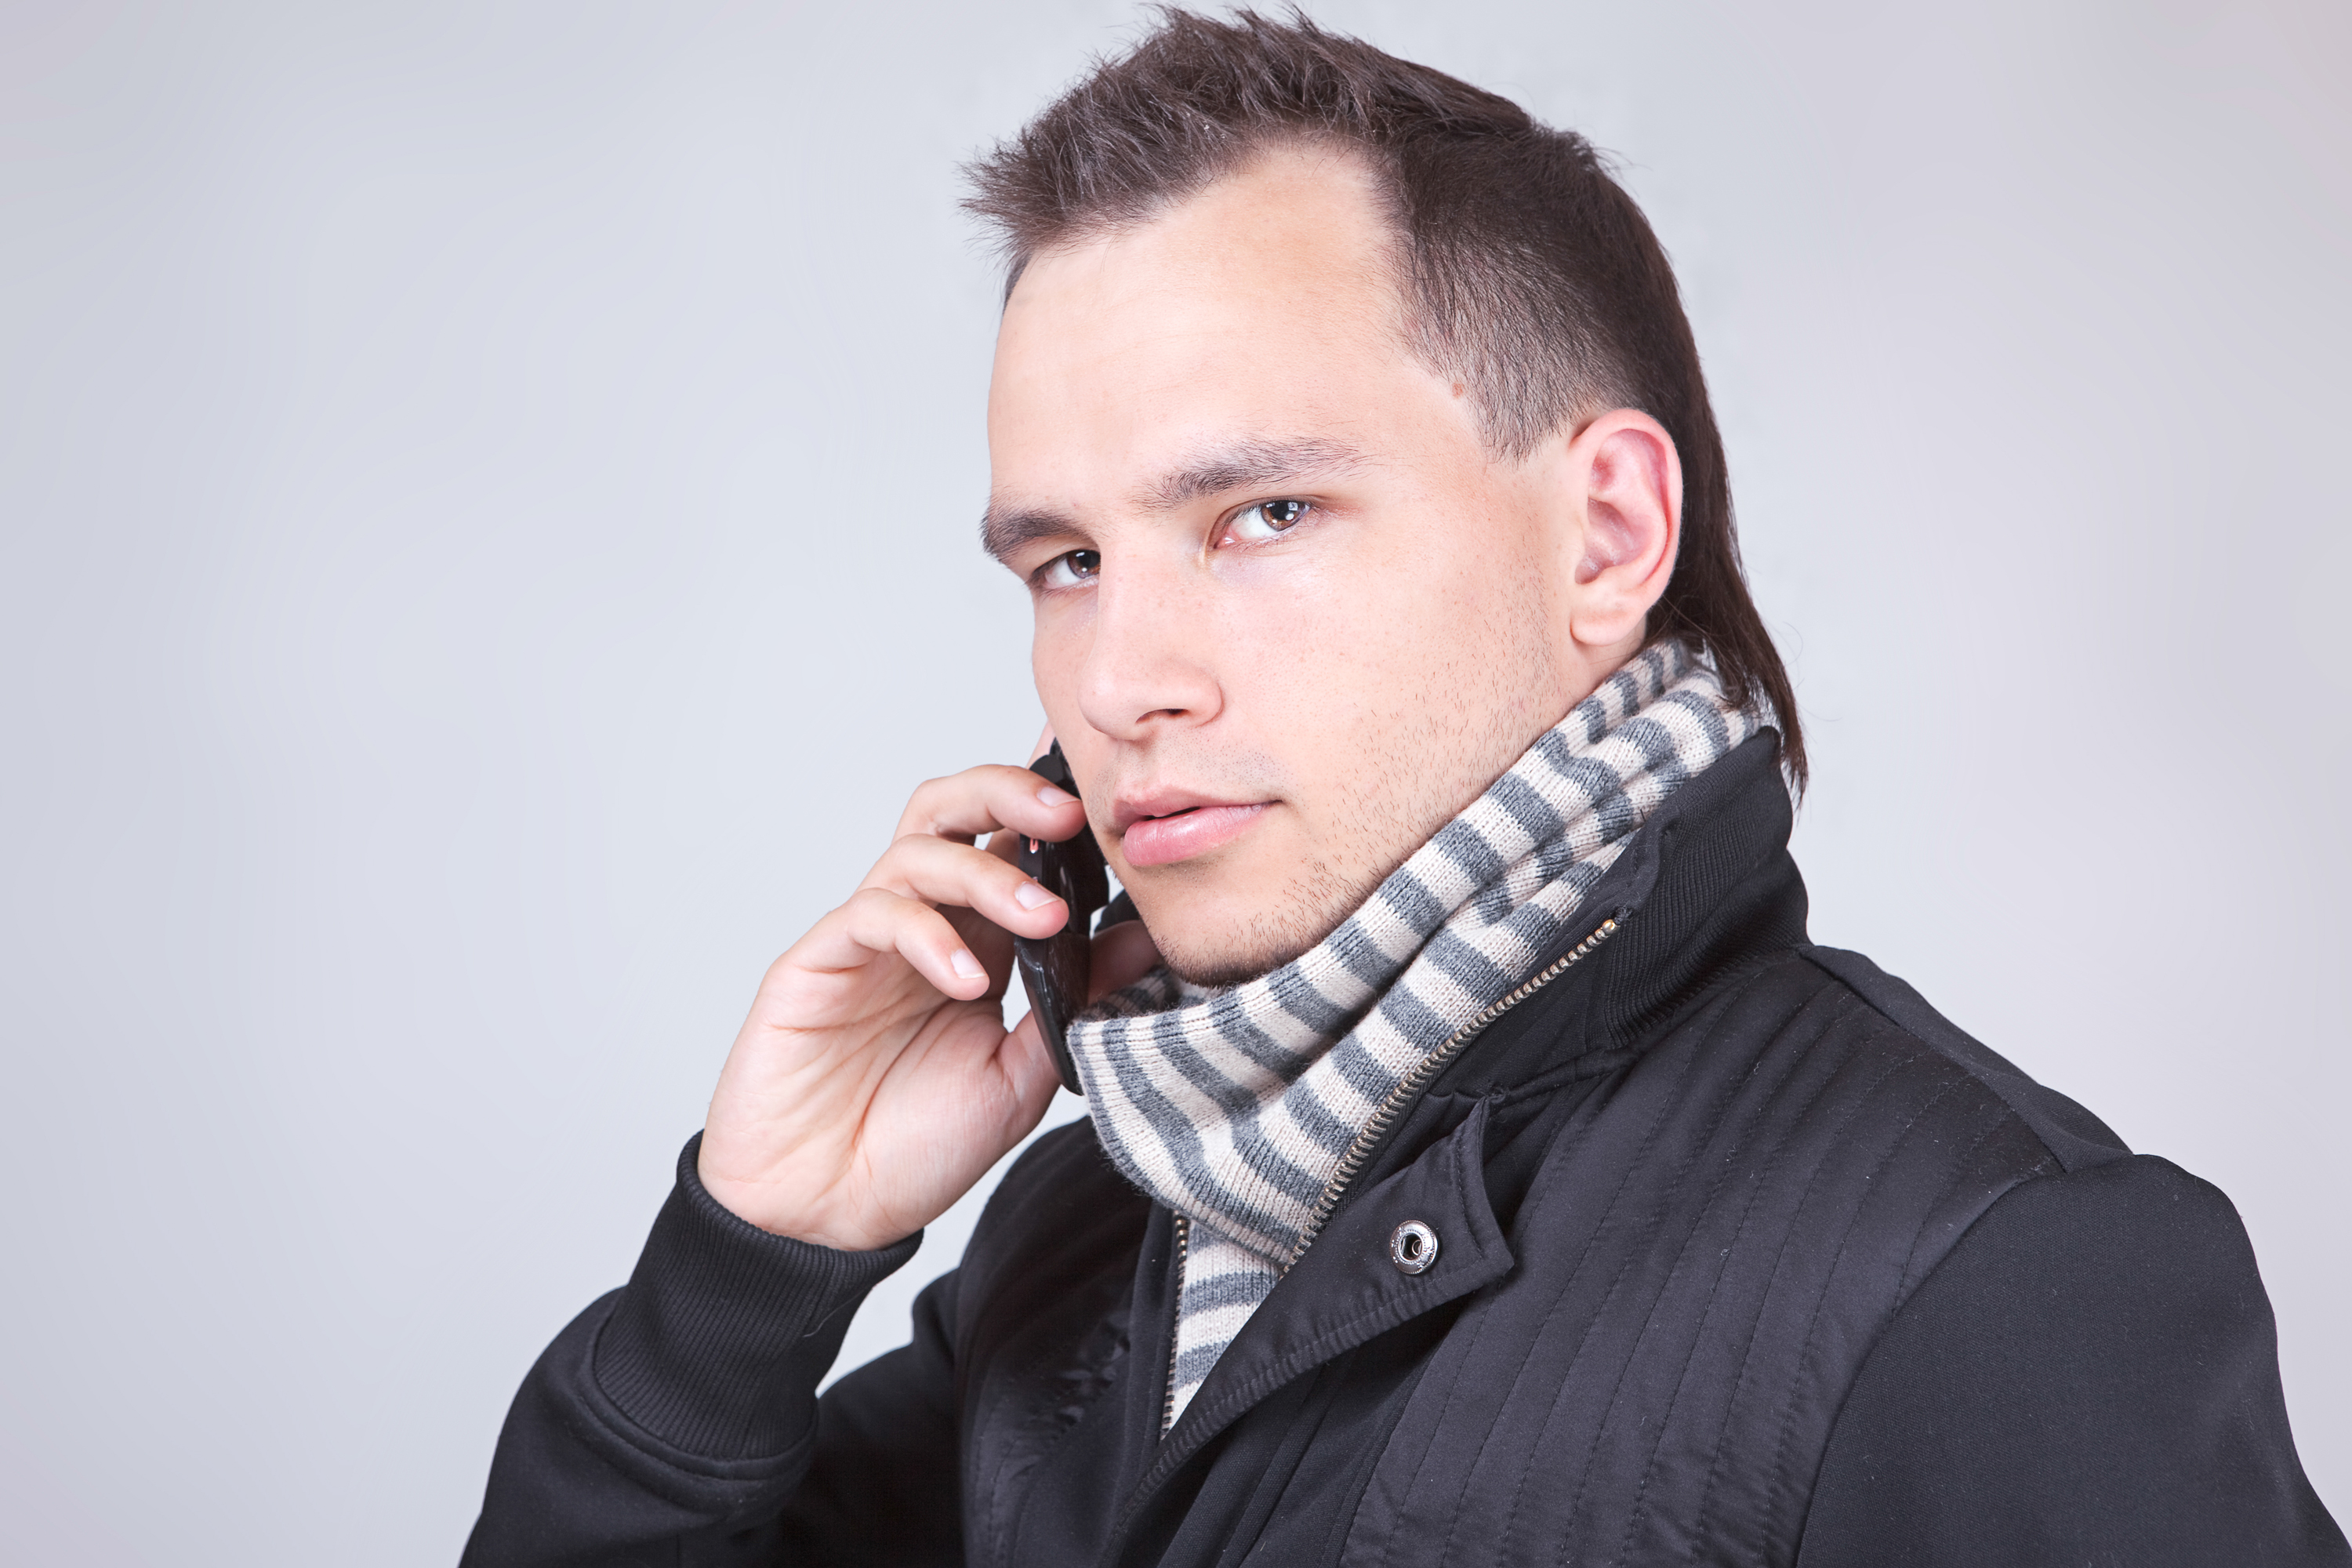 man with phone, Autumn, Looking, Single, Scarf, HQ Photo